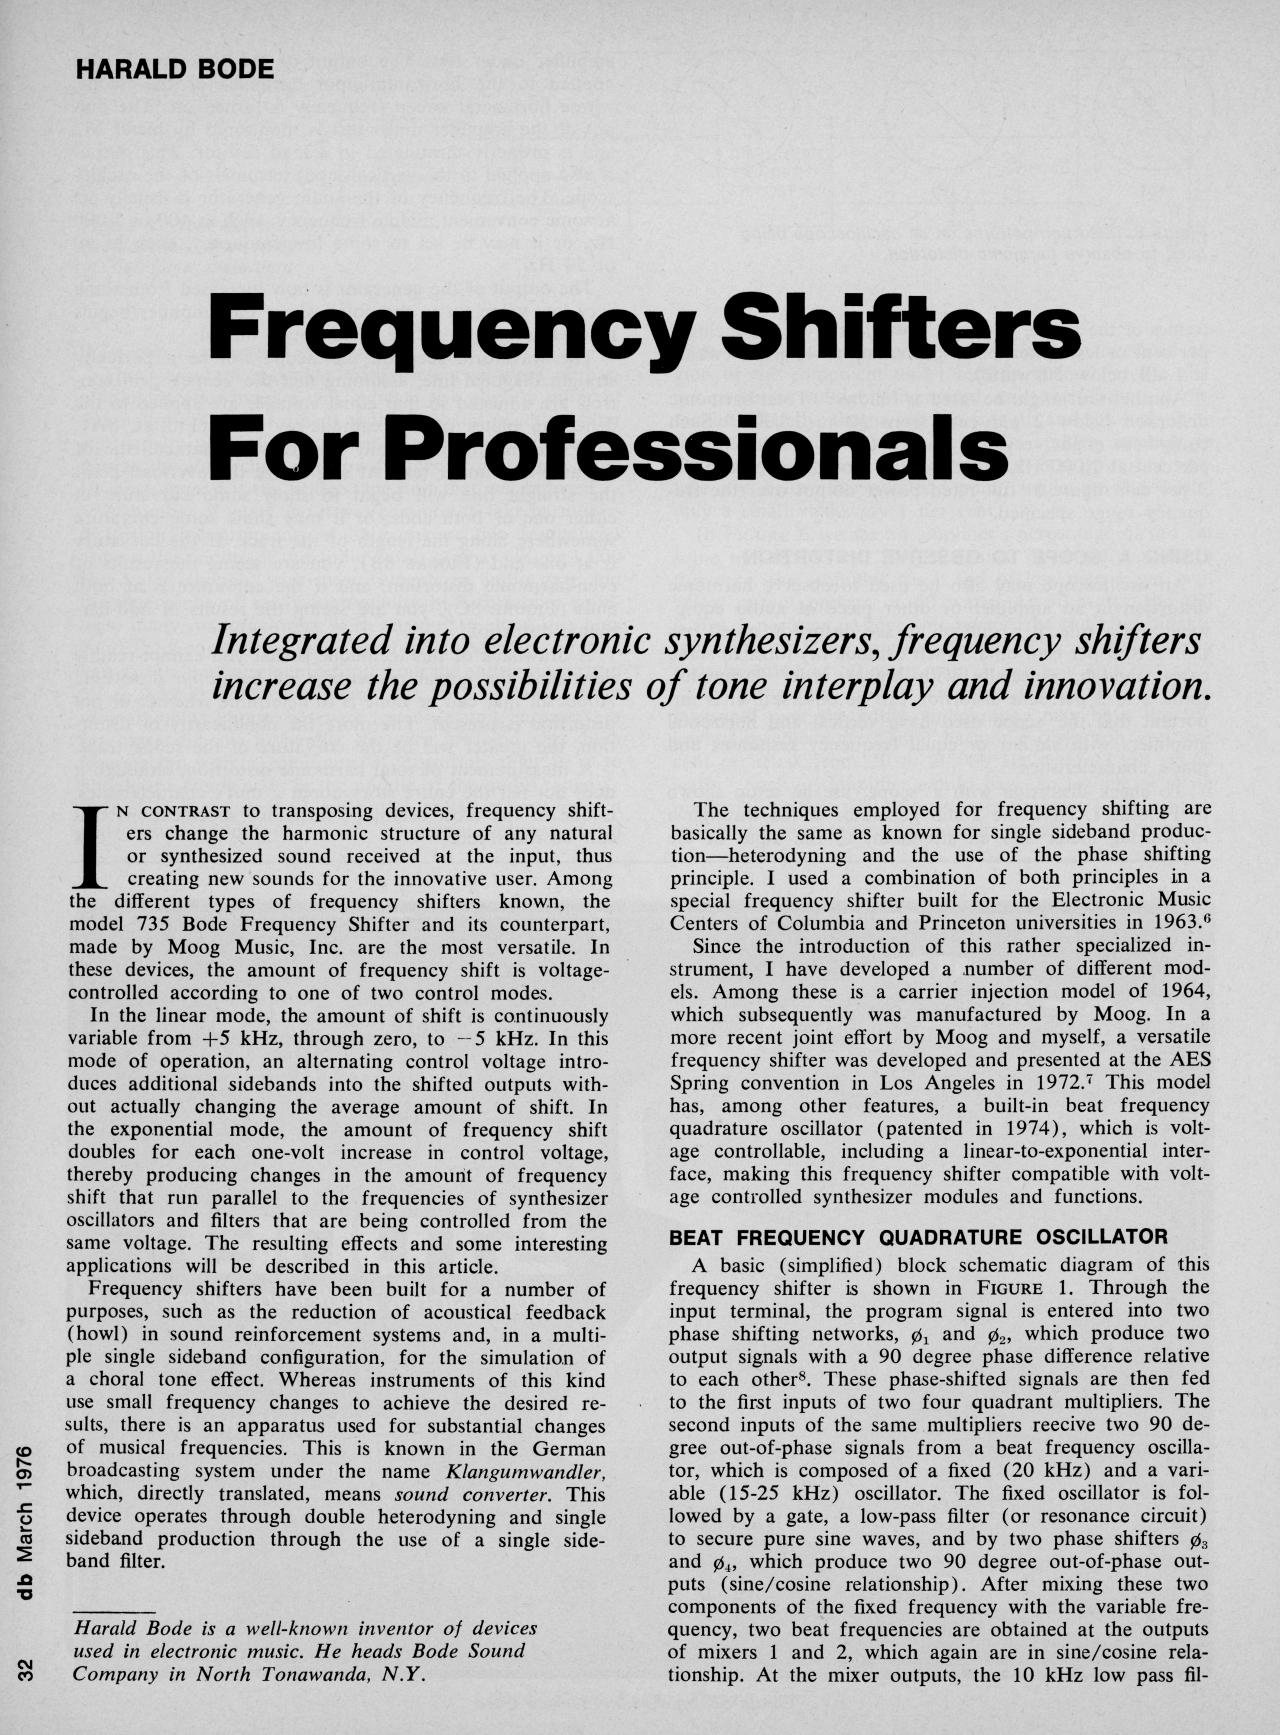  Harald Bode: »Frequency Shifters For Professionals« (1976)